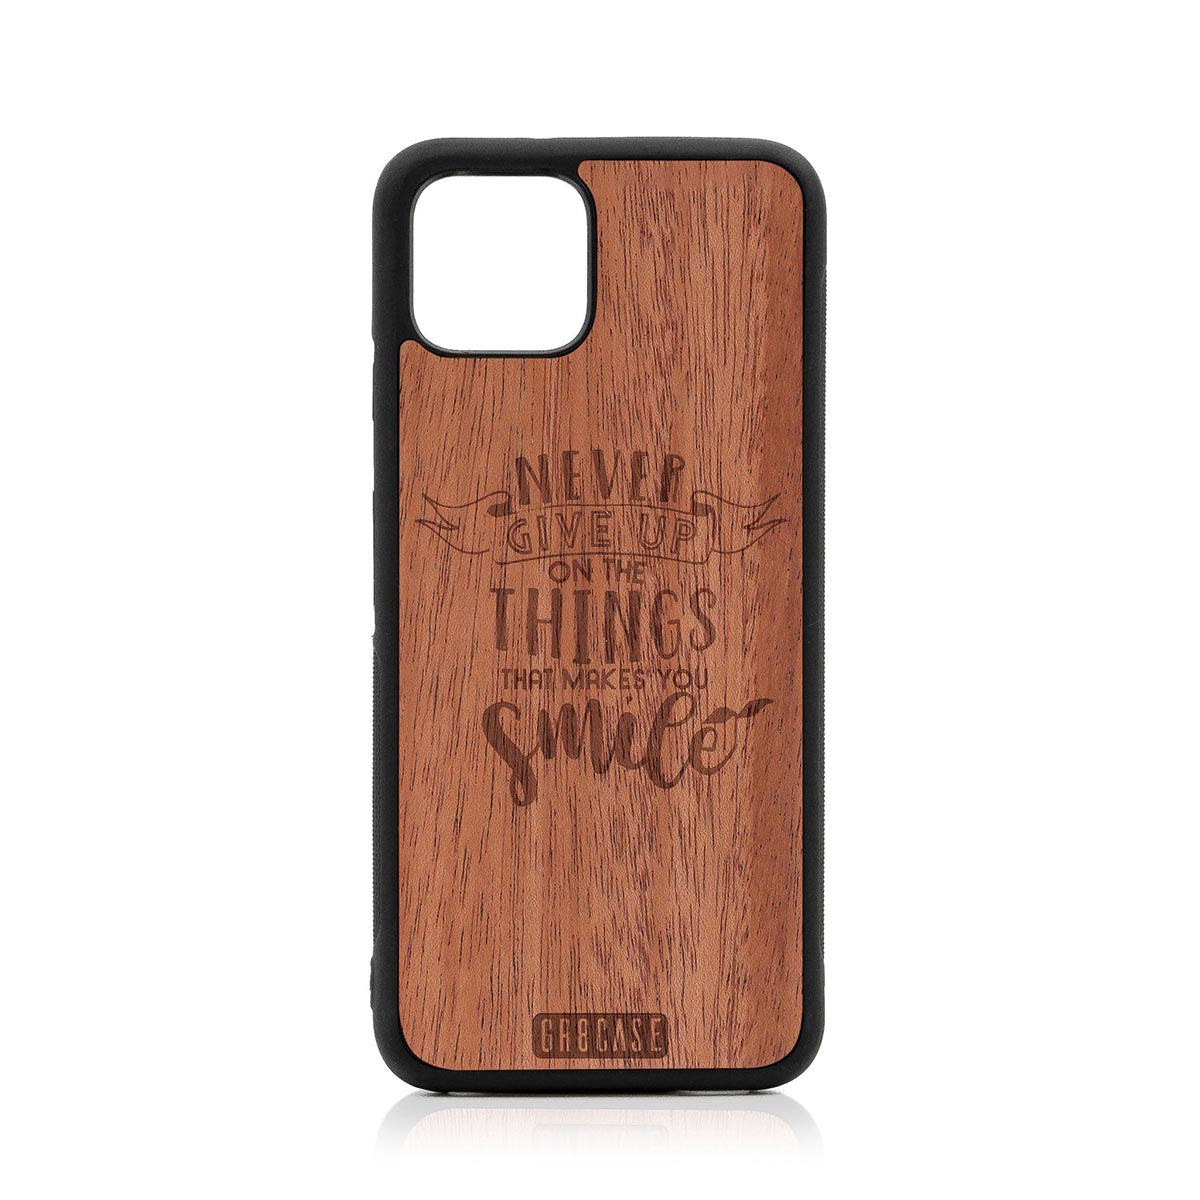 Never Give Up On The Things That Makes You Smile Design Wood Case Google Pixel 4 by GR8CASE